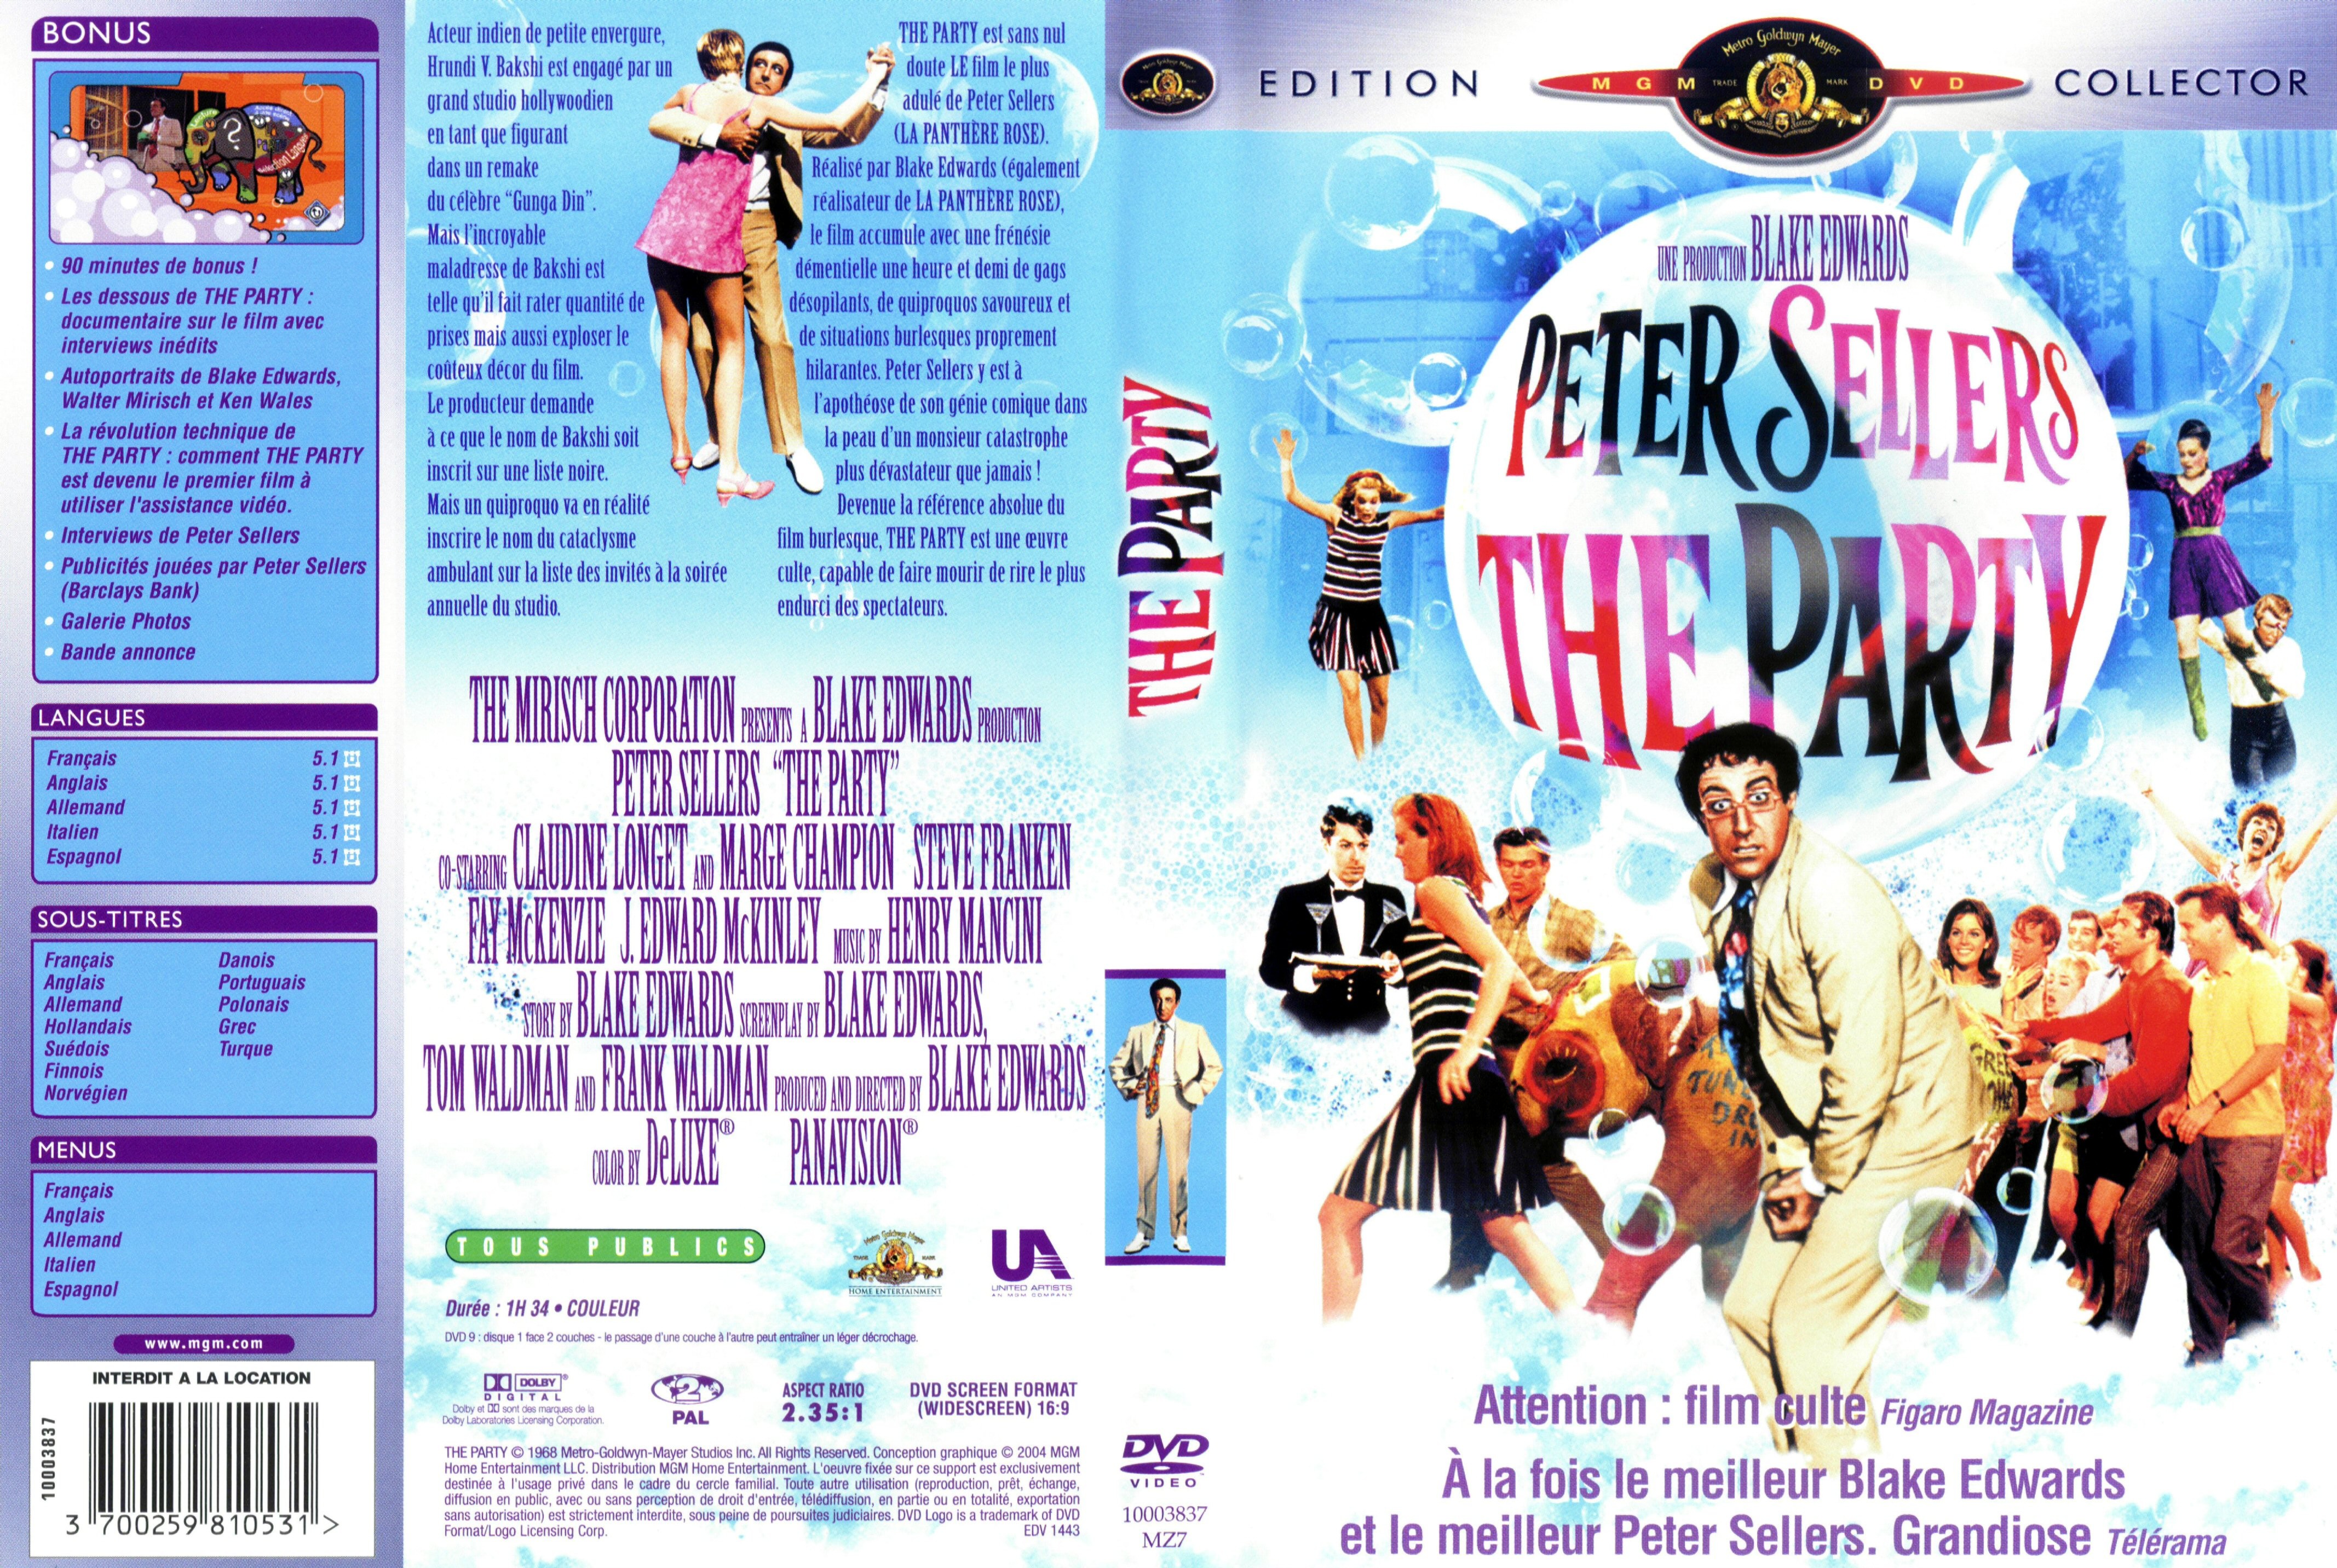 Jaquette DVD The party